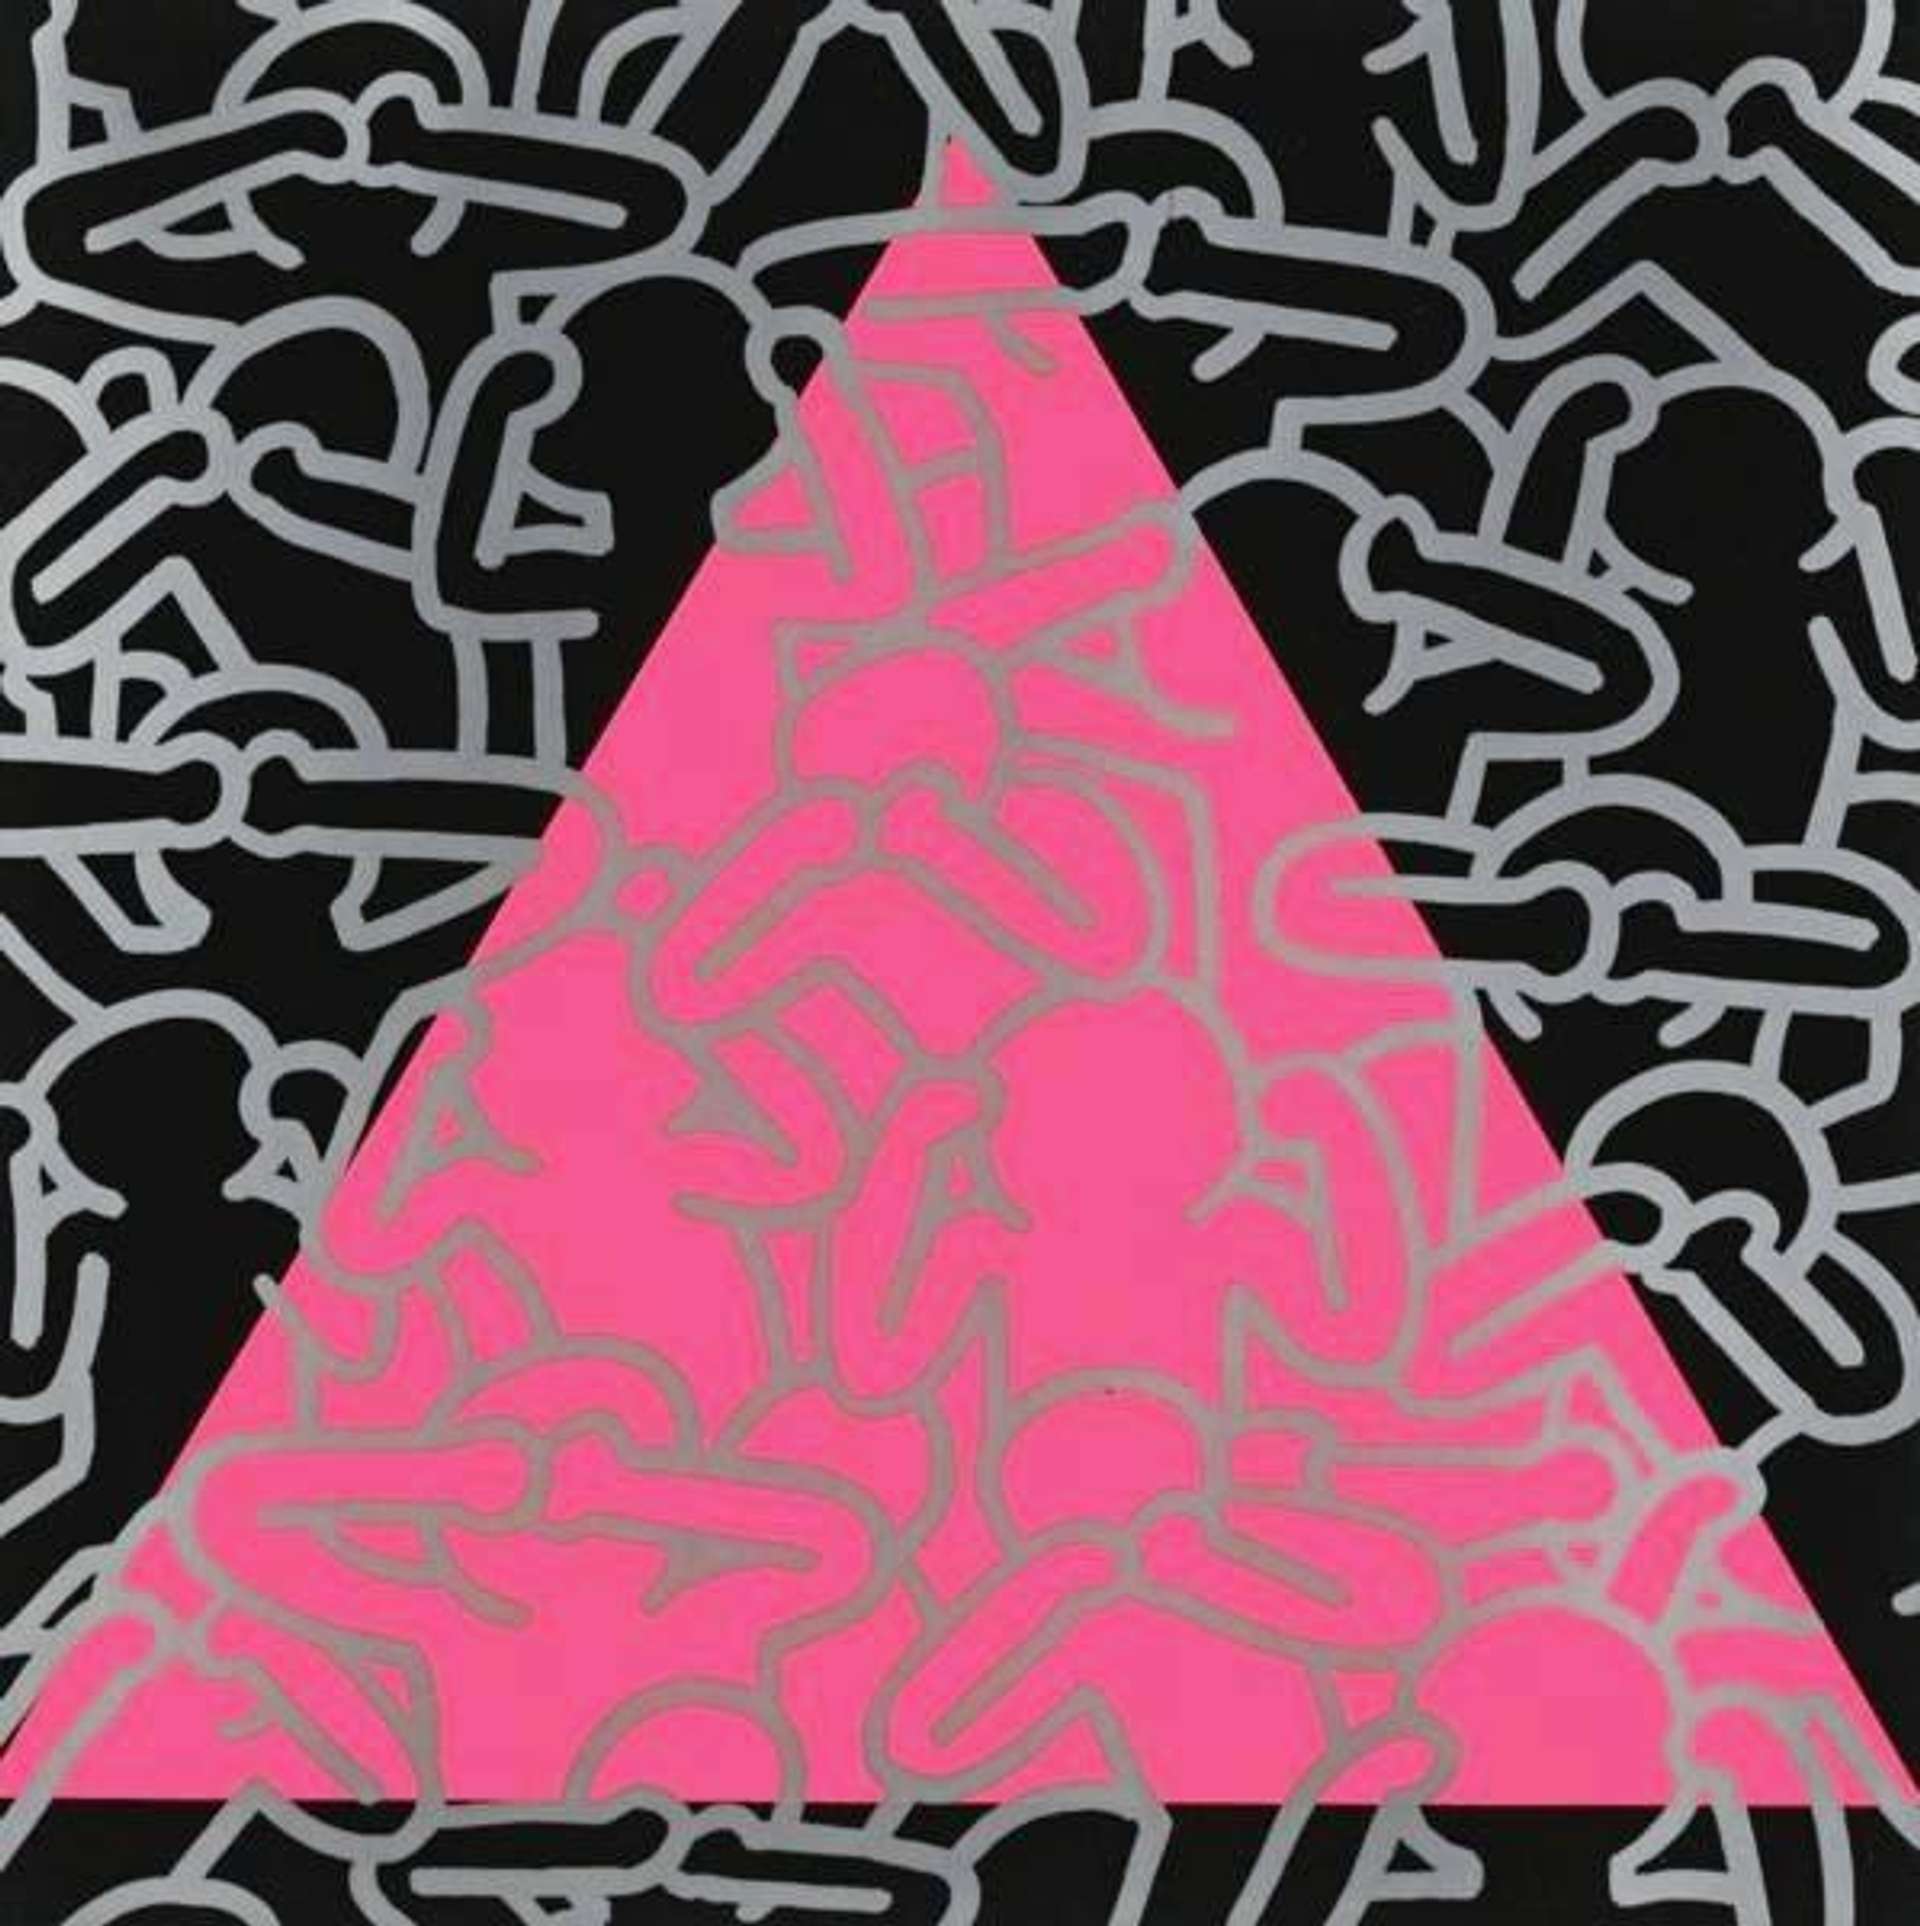 10 Facts About Keith Haring's Pyramids